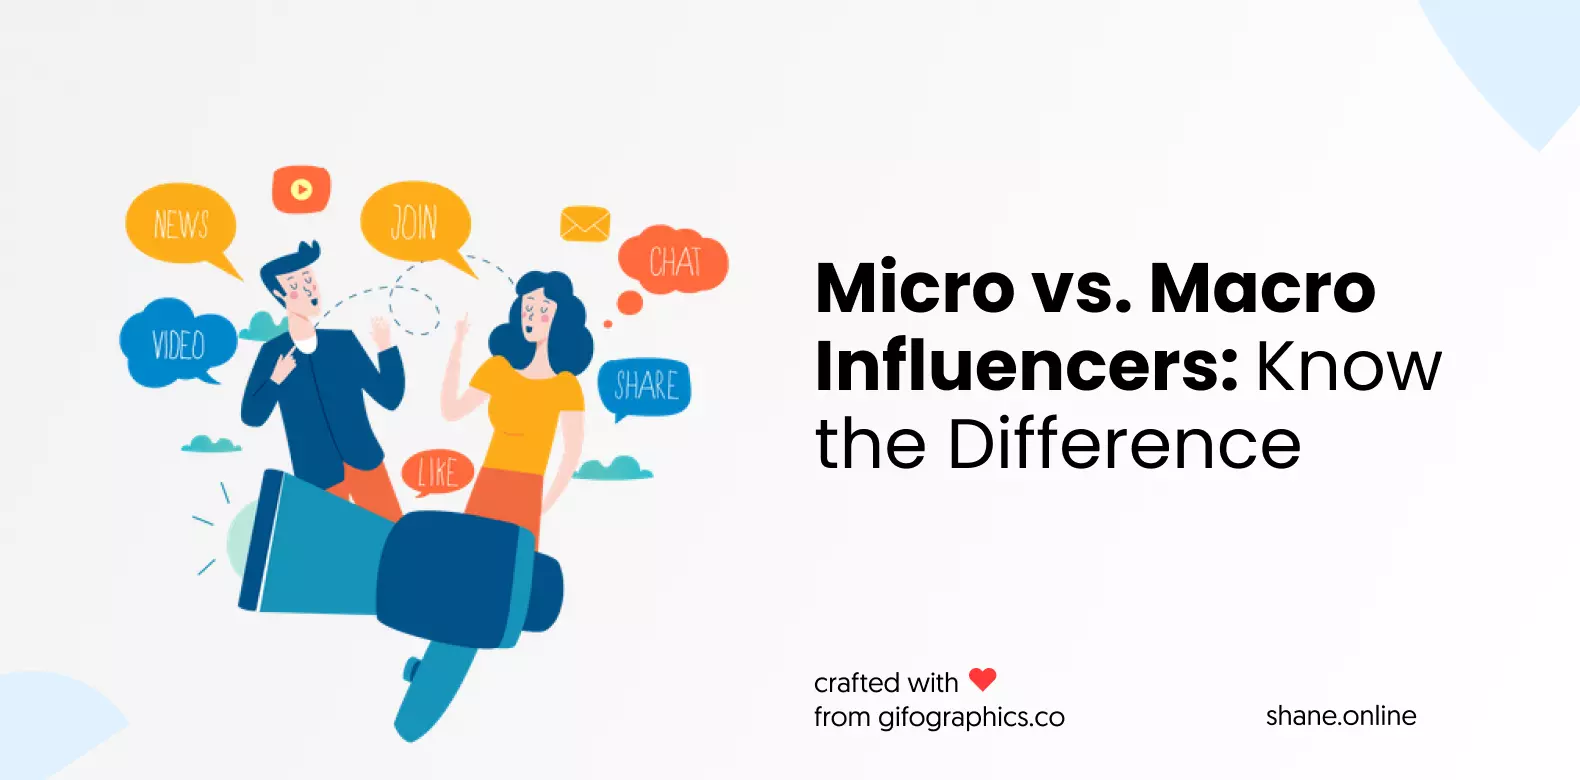 Micro vs. Macro Influencers: Know the Difference